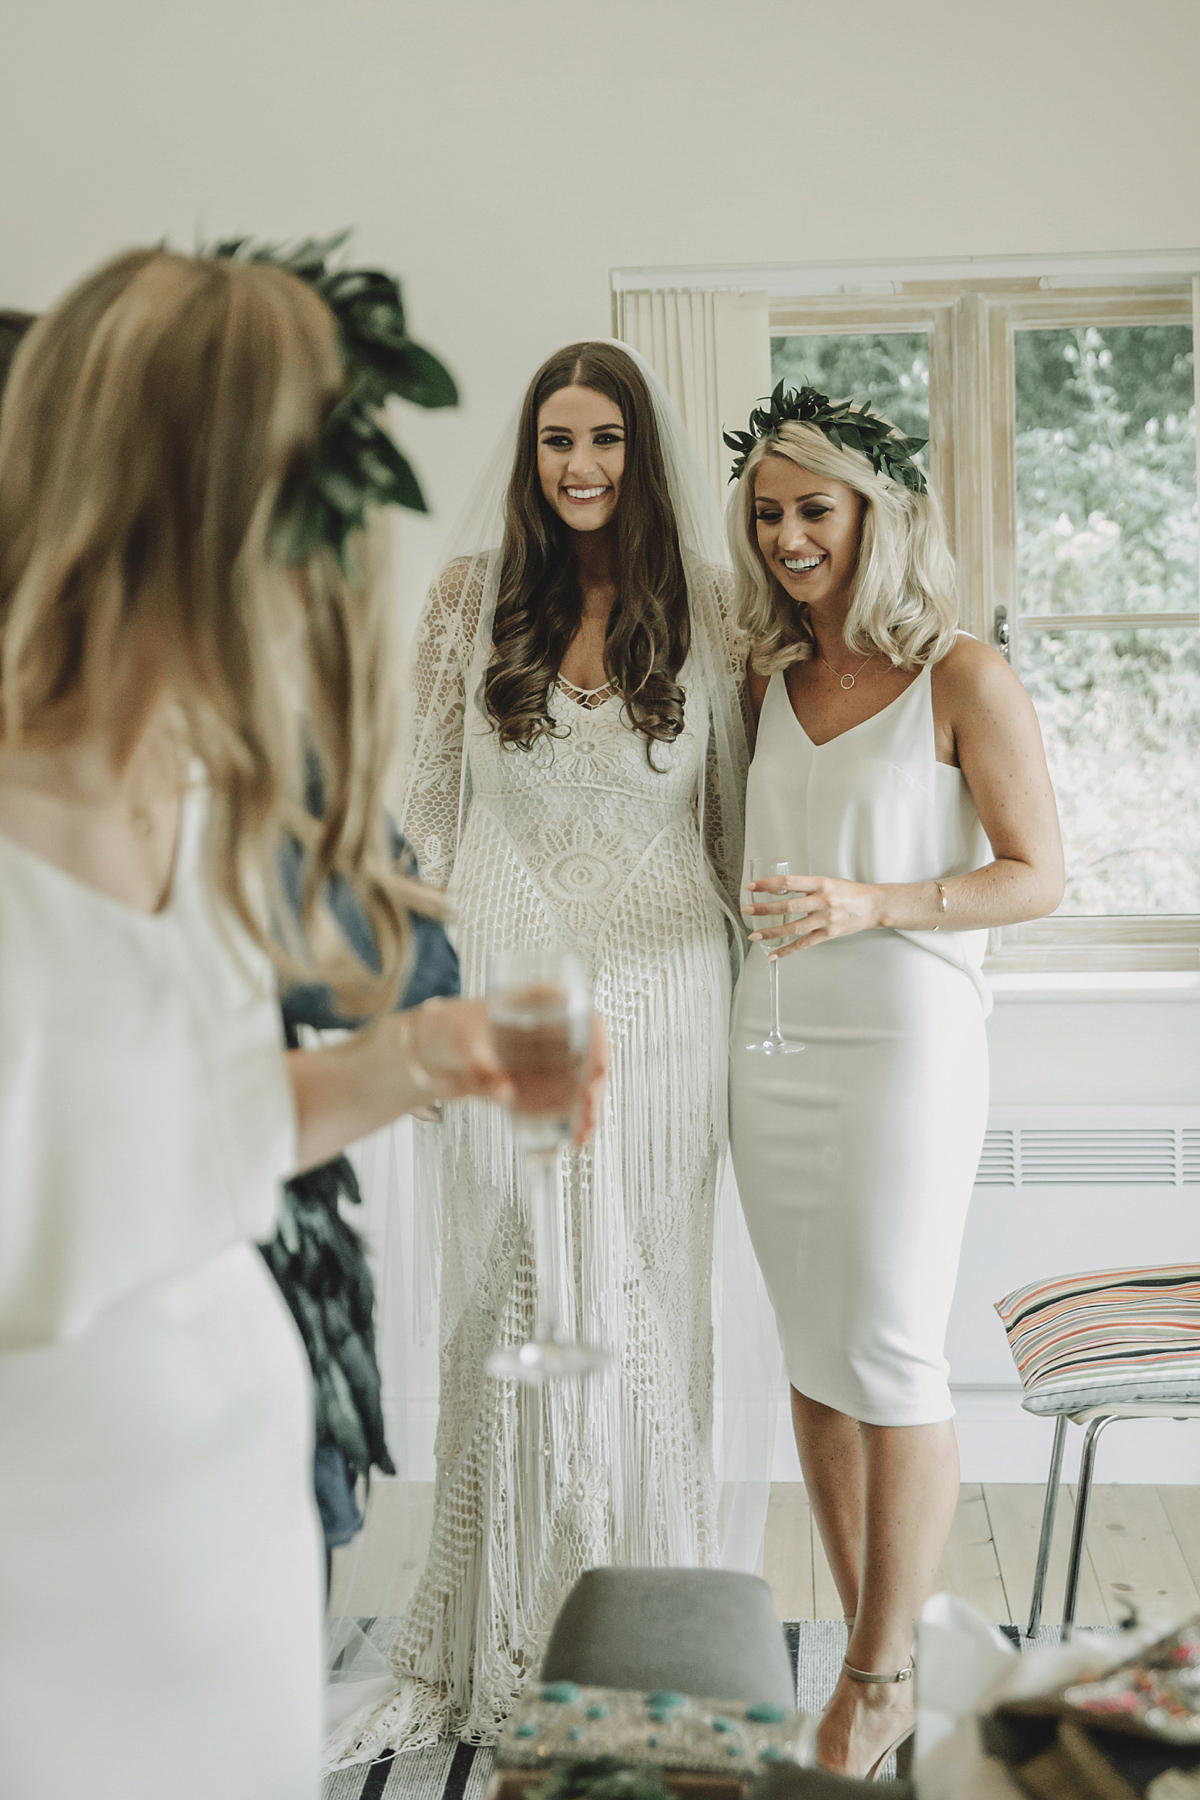 Toria wore a Rue de Seine gown for her natural, organic, Kinfolk inspired and bohemian wedding. Photography by Kat Hill.